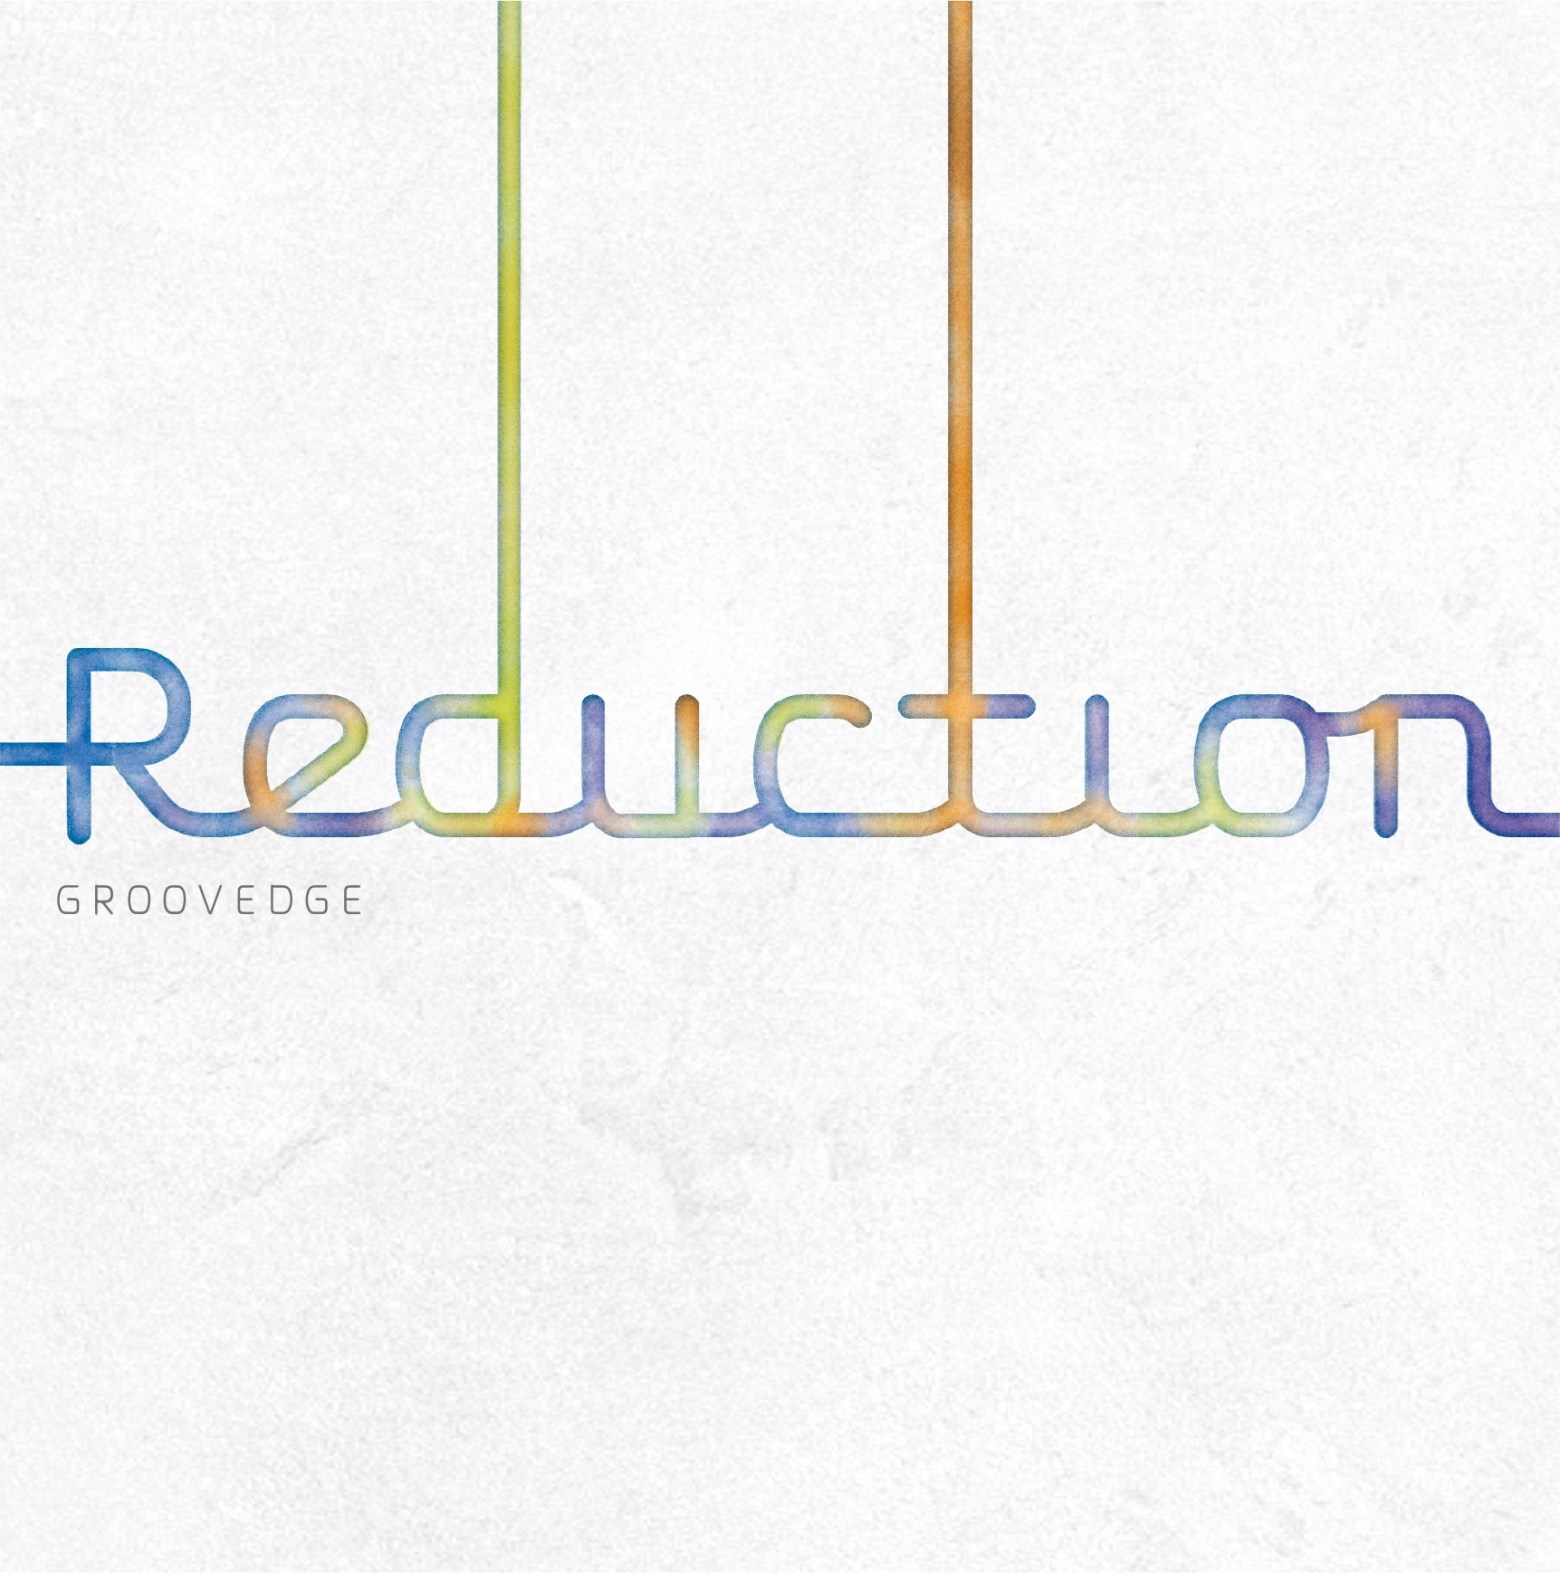 Reduction/GROOVEDGE